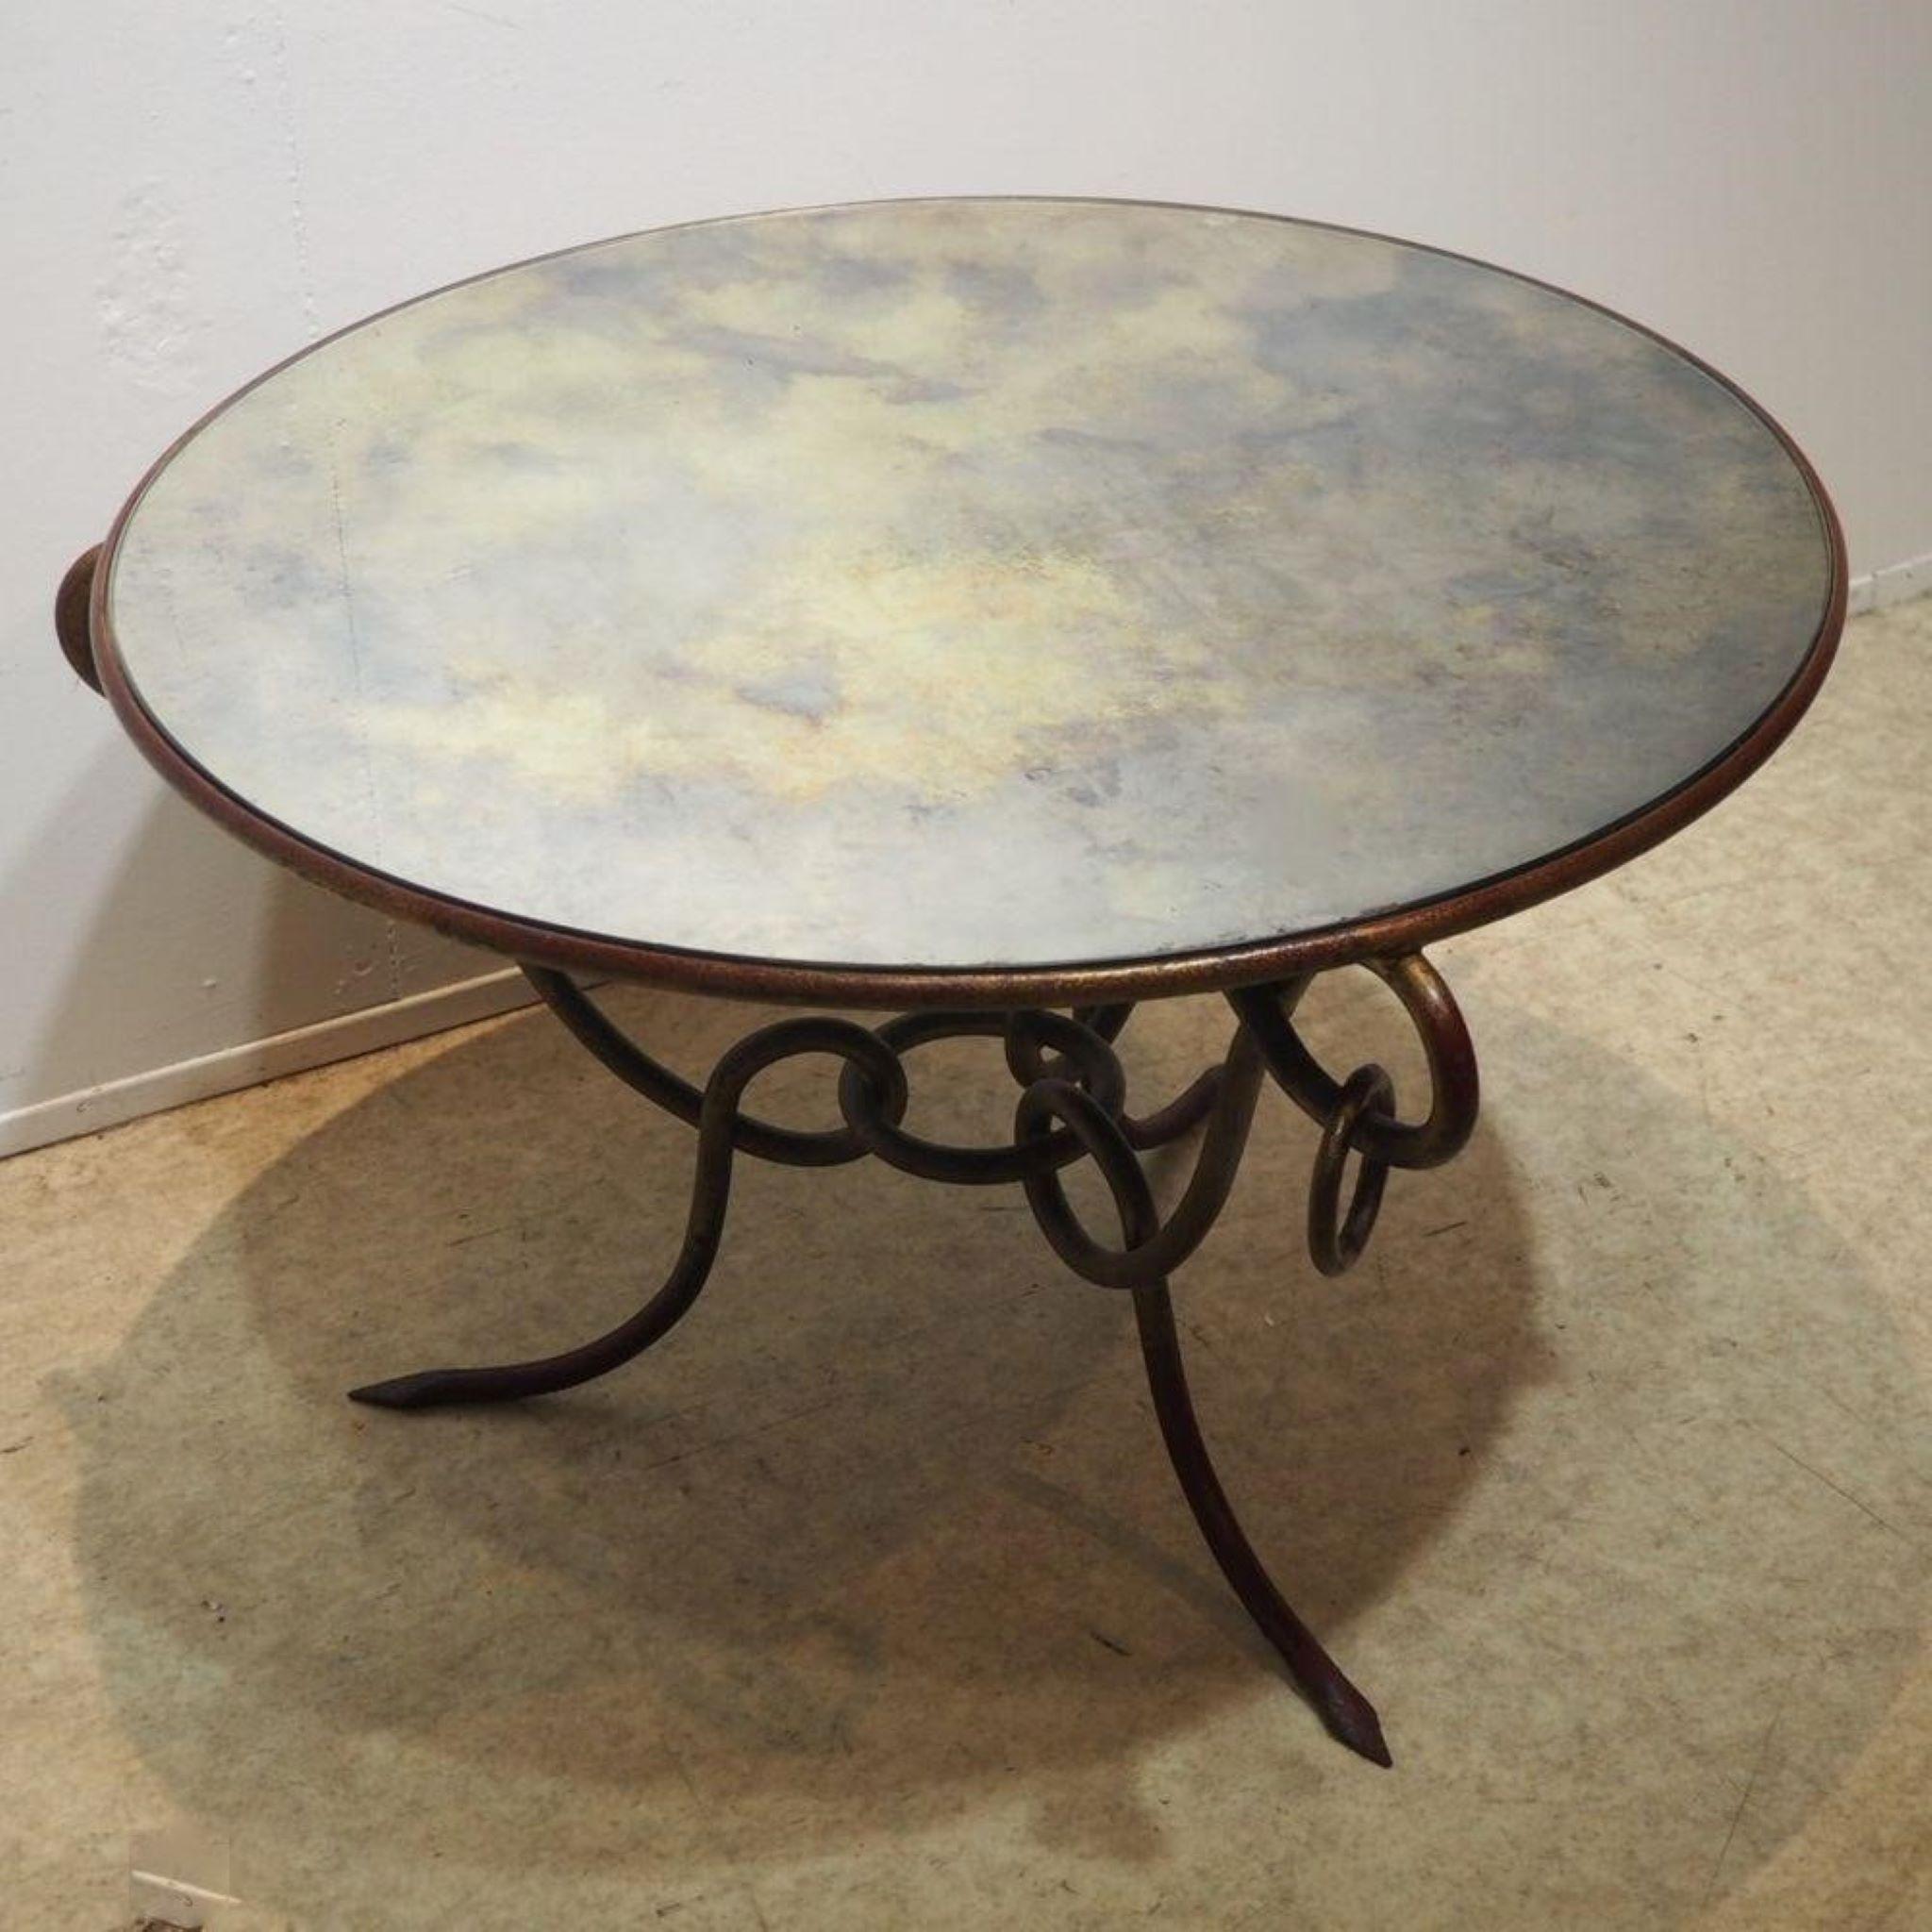 Gueridon formed by a circular beveled mirror top, set in a gilt structure with patina, rests on an interlocking tripod base in gilt iron with gilt patina, joined in the center by a ring, decorated with a free ring on each top.

France